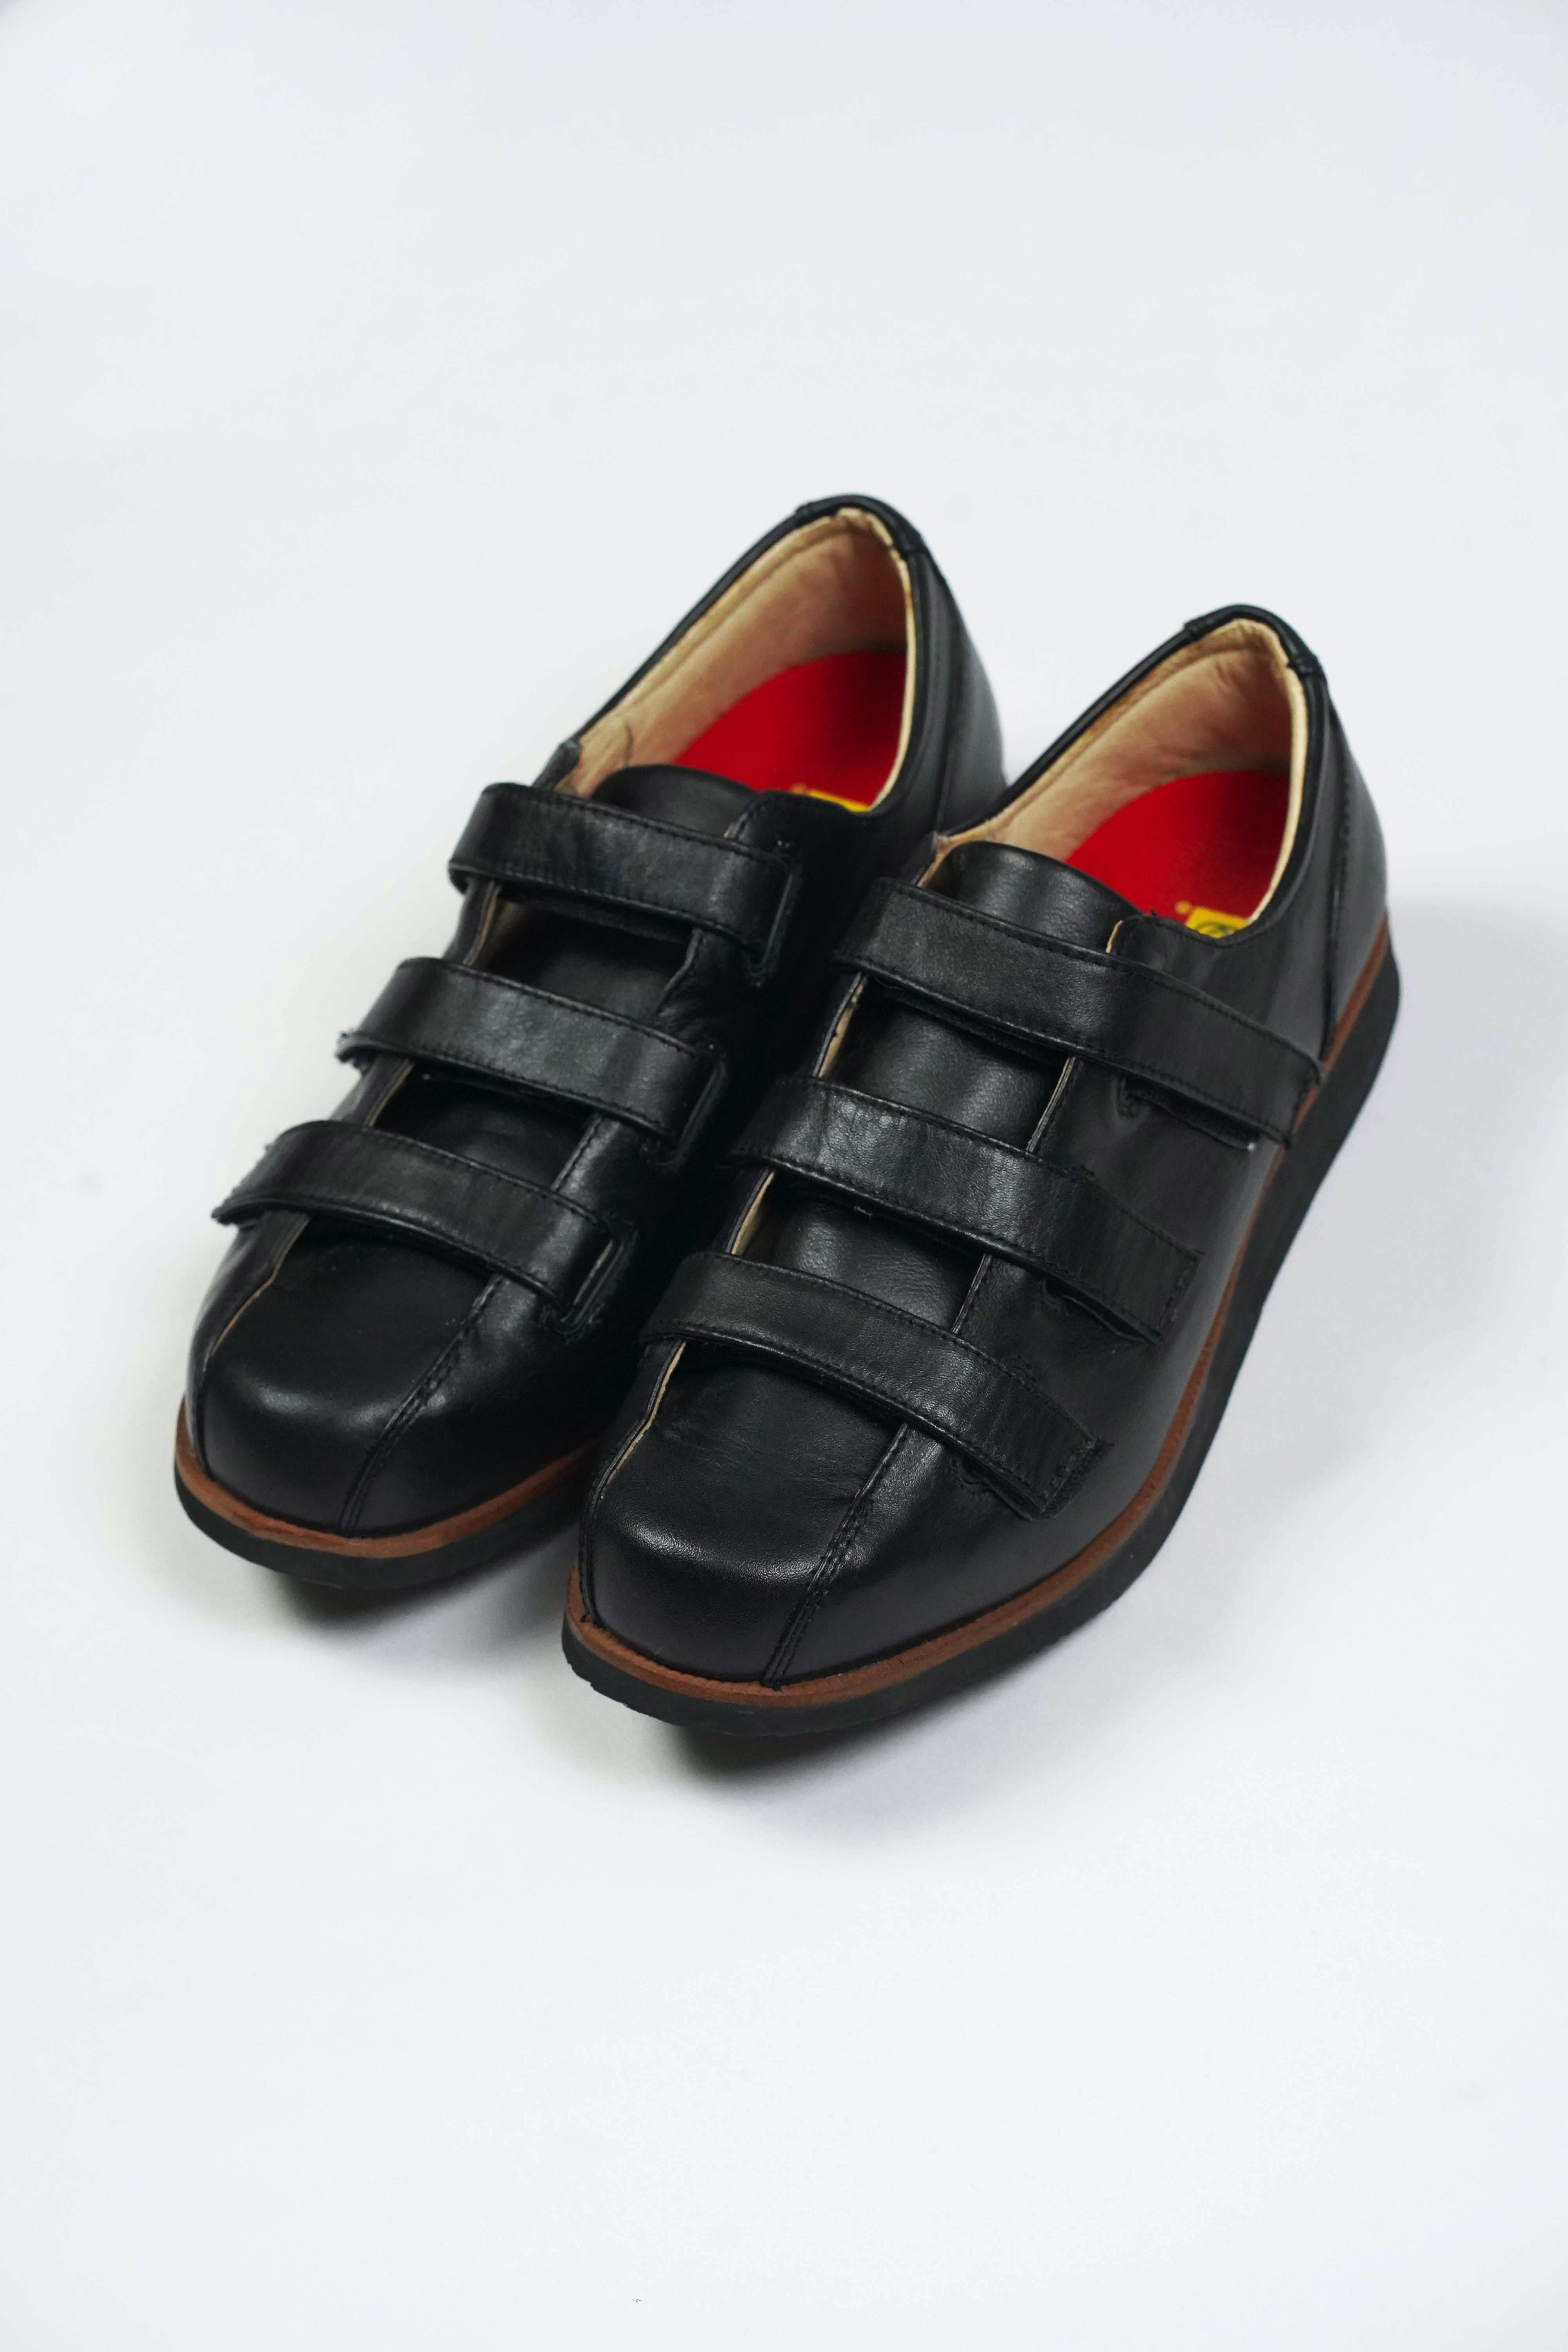 DEADSTOCK VELCRO LEATHER SHOES